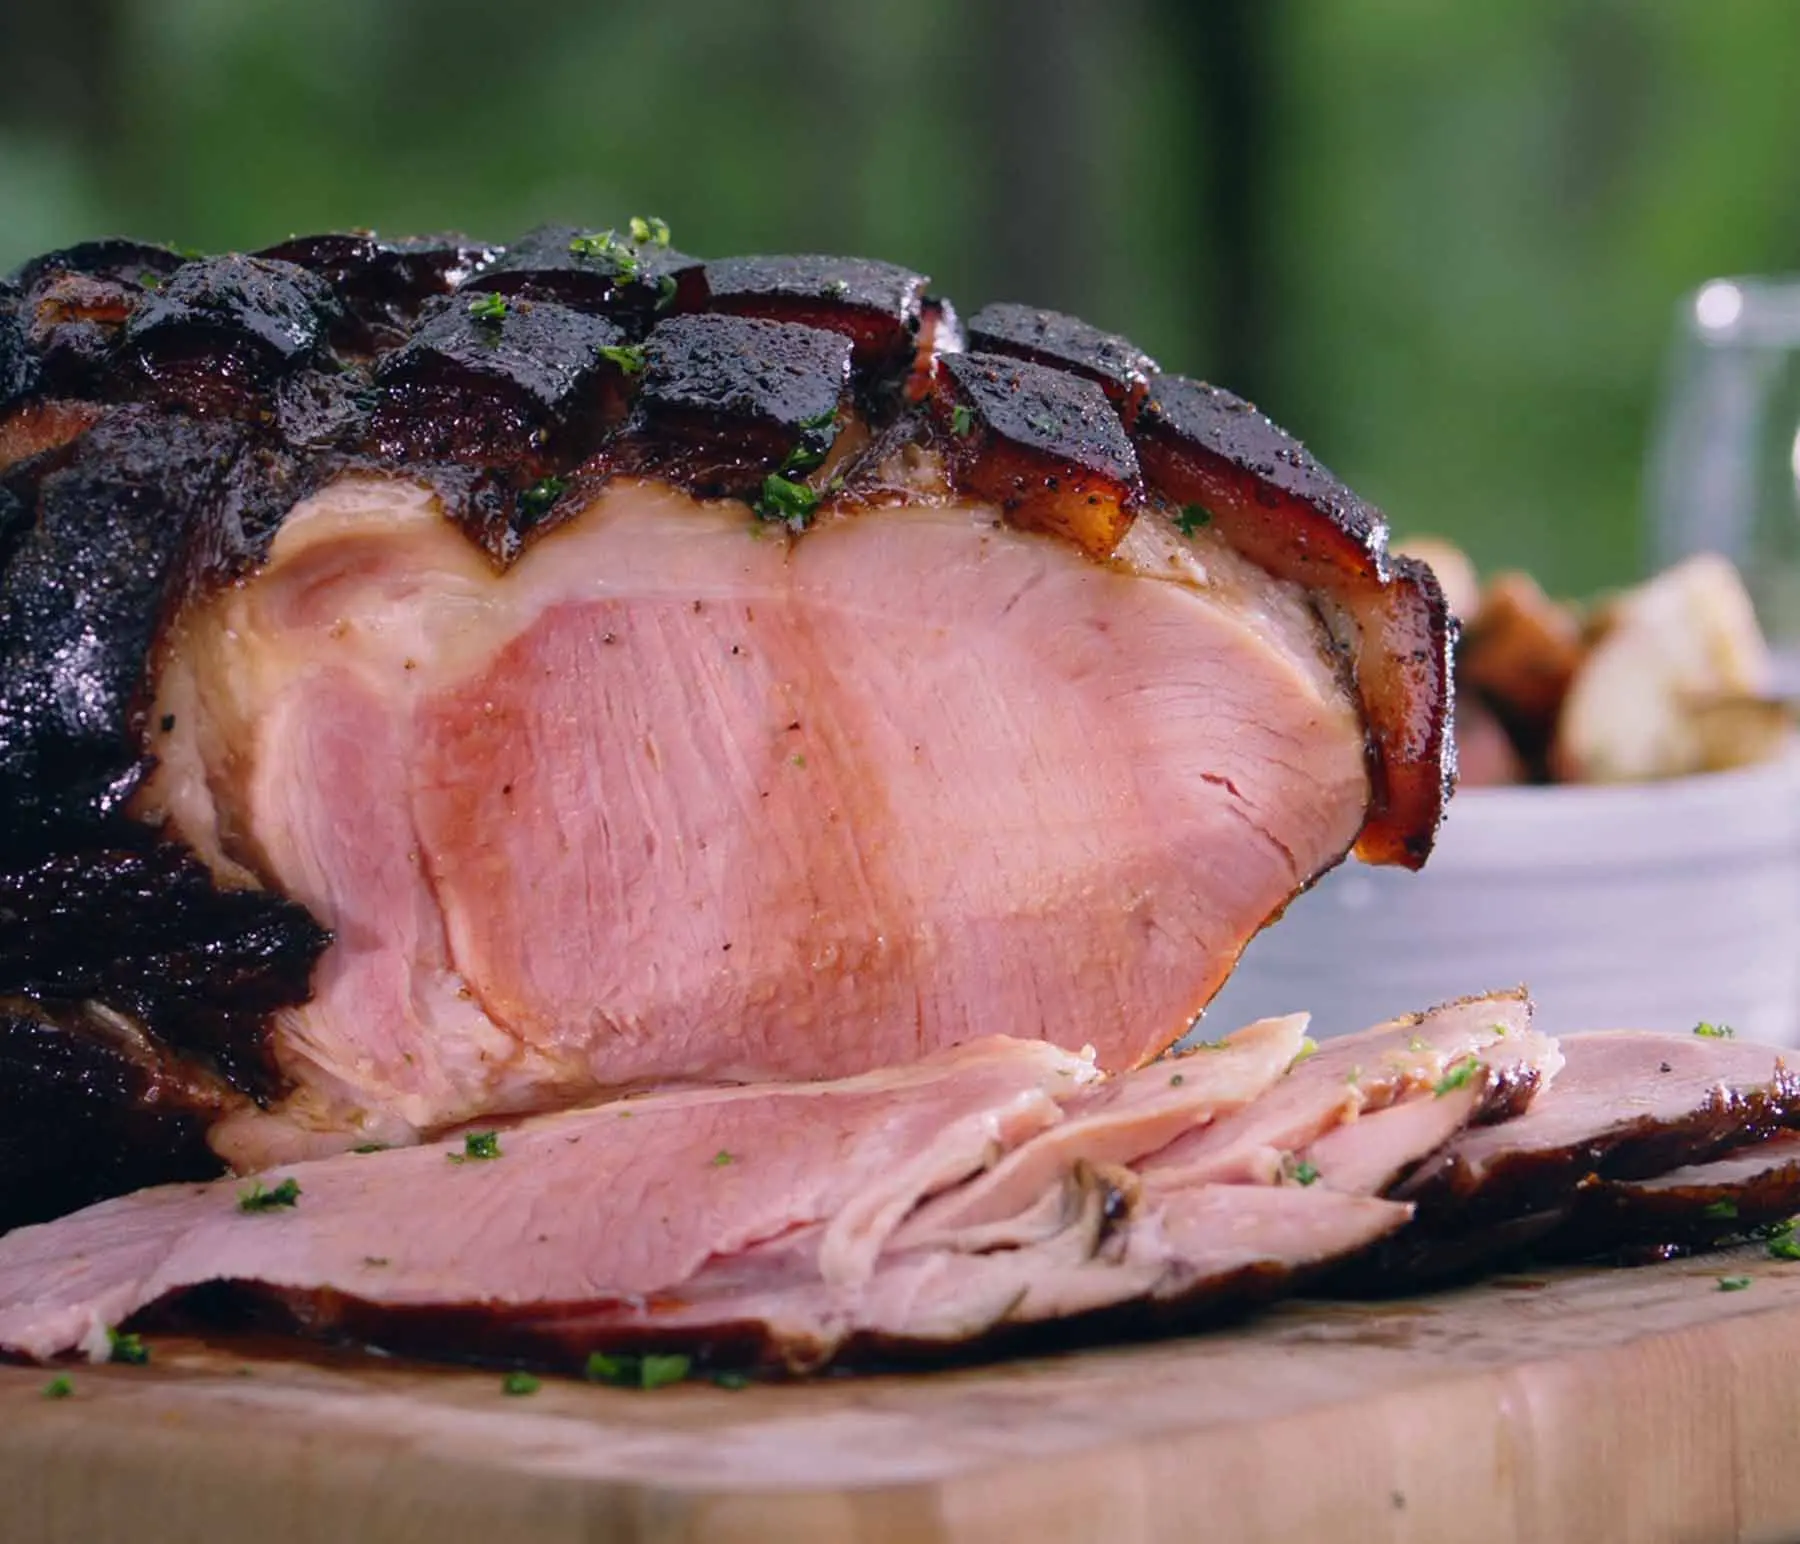 cured or smoked ham - Which is better cured or uncured ham